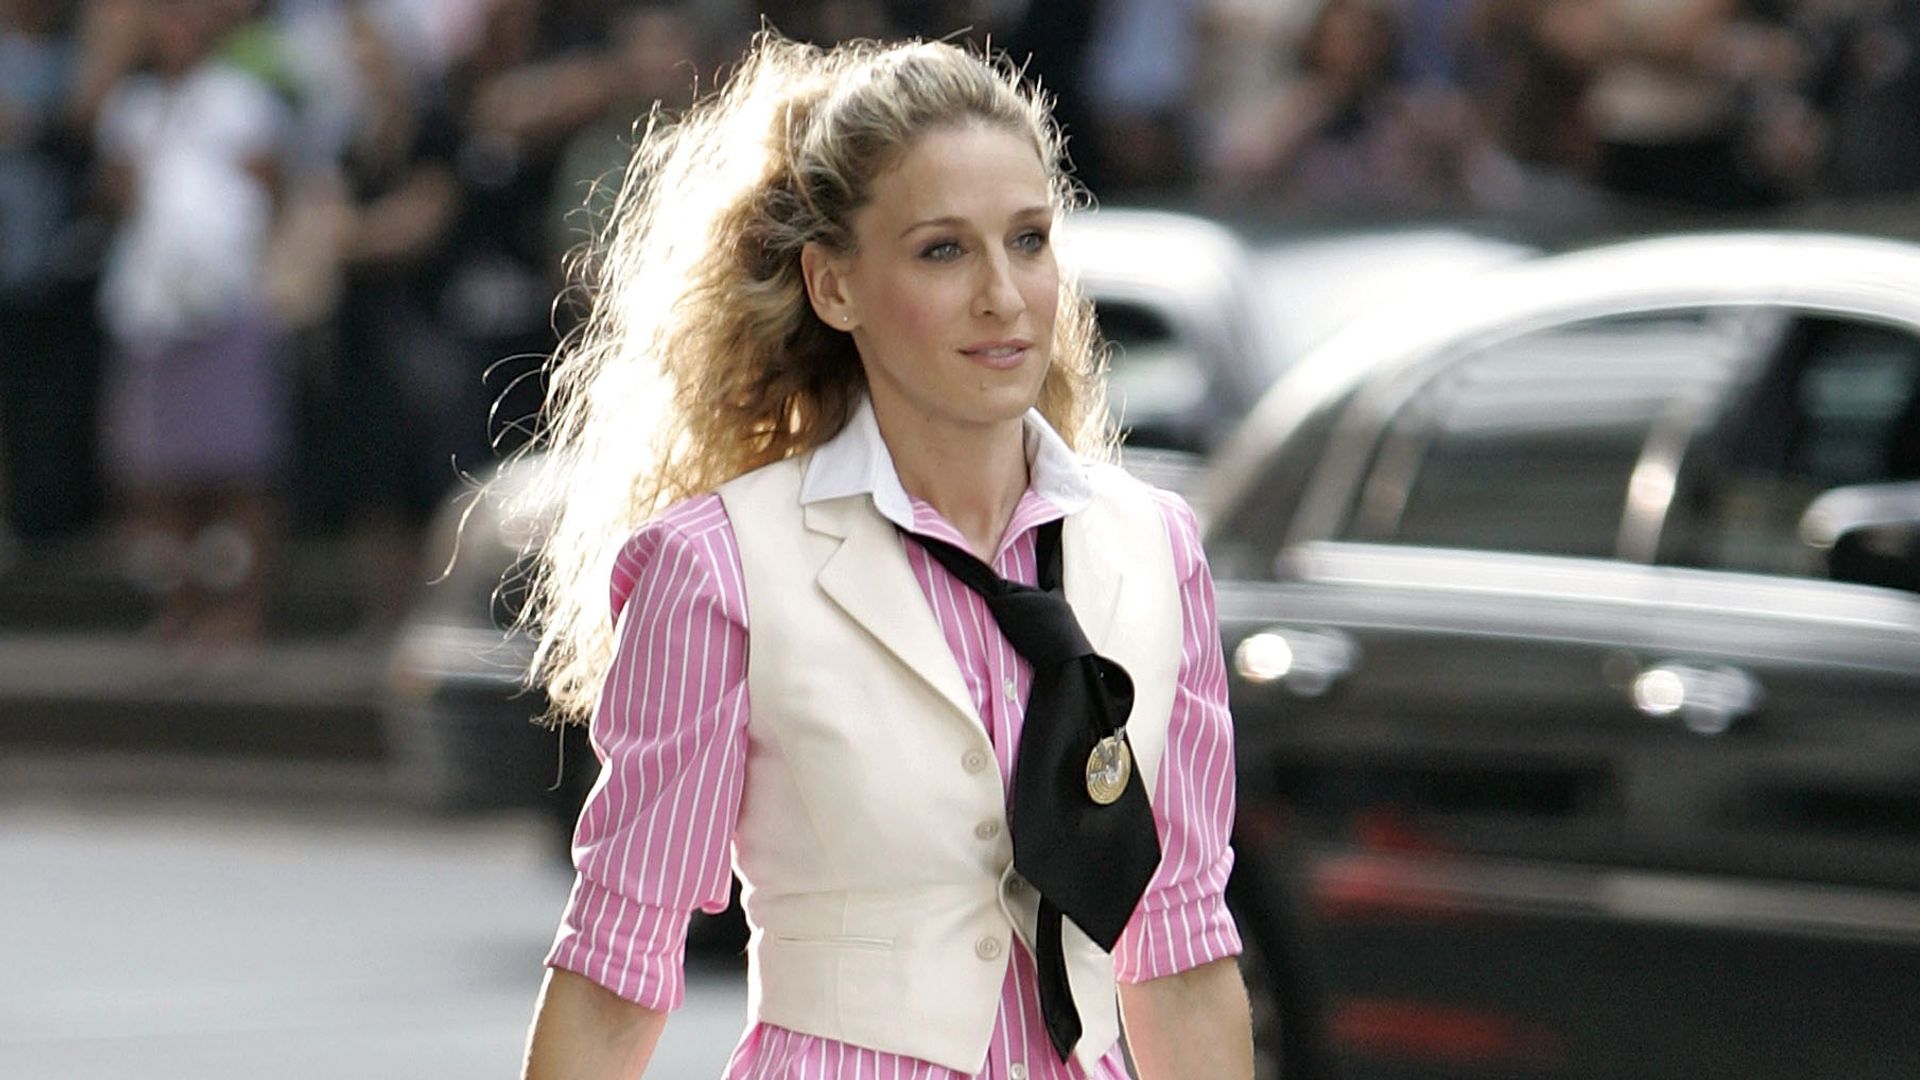 Carrie Bradshaw wearing a cream waistcoat, black tie, pink striped shirt, tailored trousers and holding a round hat bag  